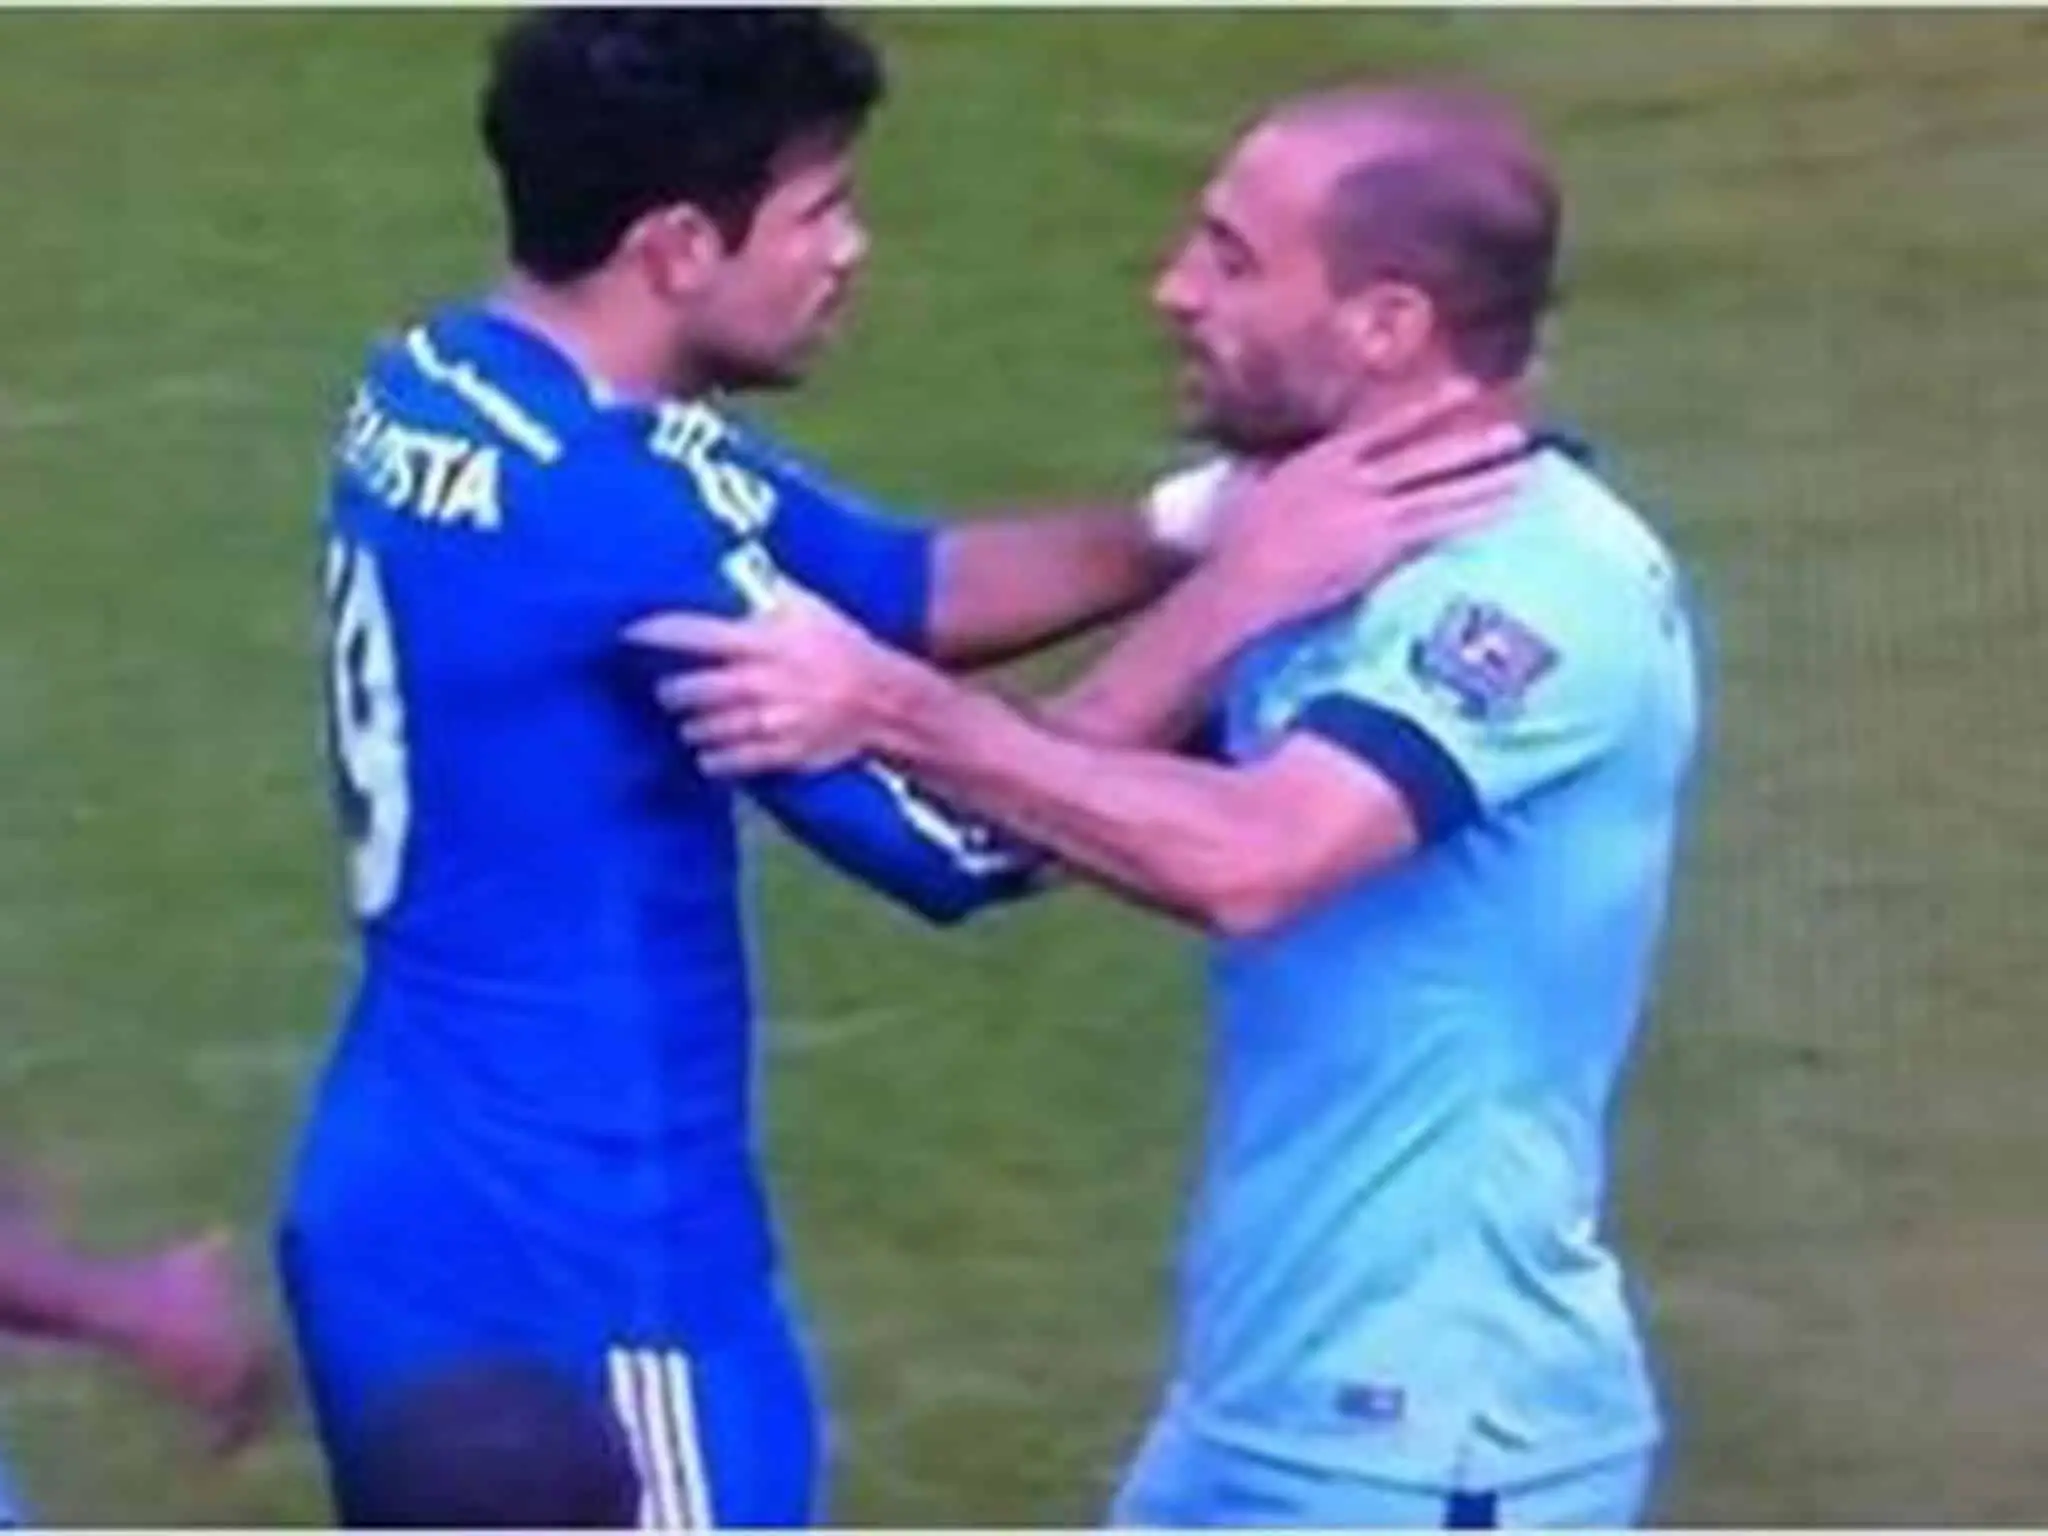 The fight between Diego Costa and Pablo Zabaleta.